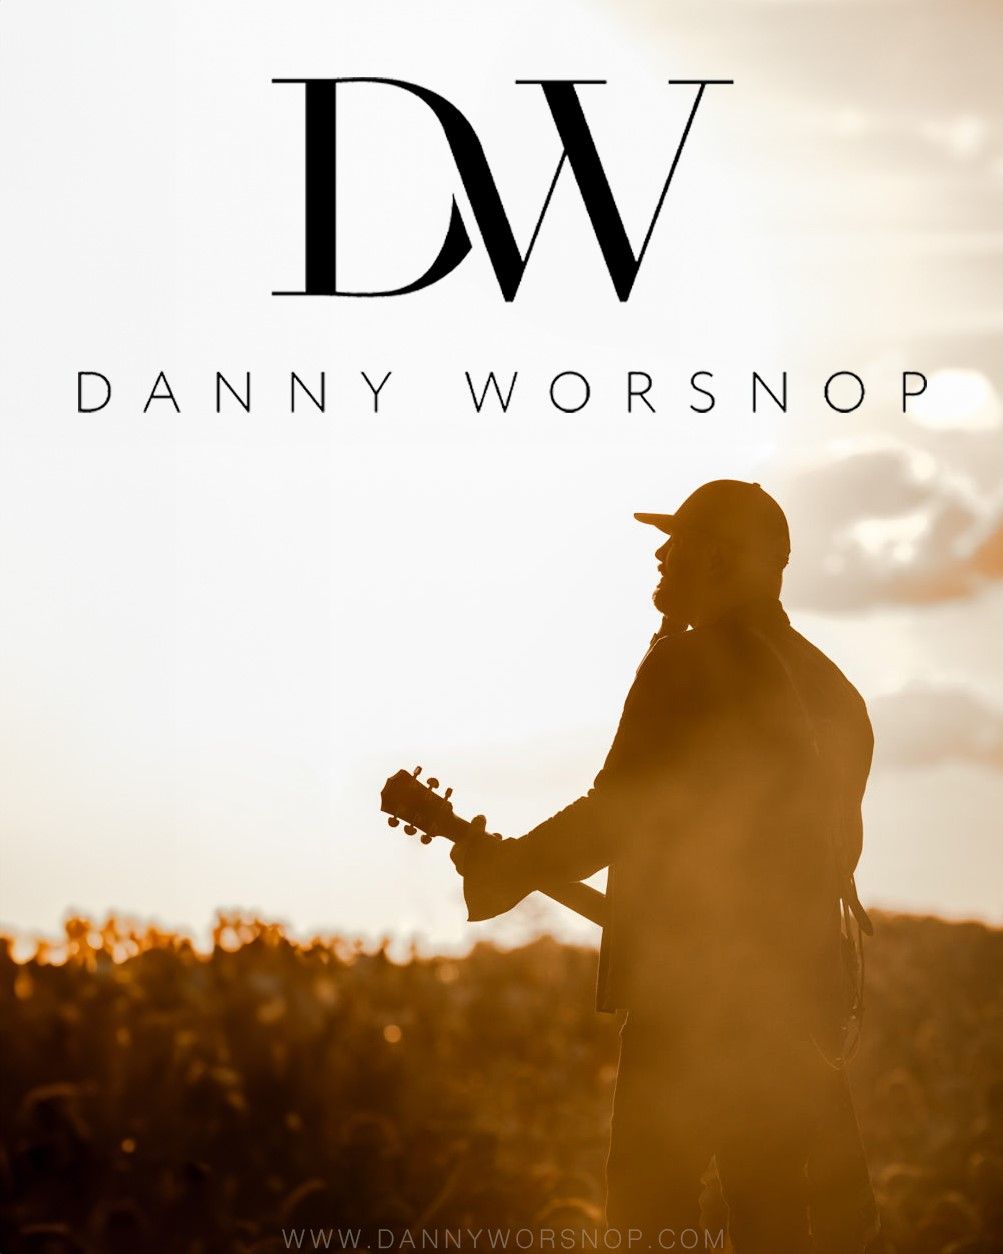 Radio Room Presents: Danny Worsnop with Jericho Rose and Hurt & Skip at Swanson's Warehouse